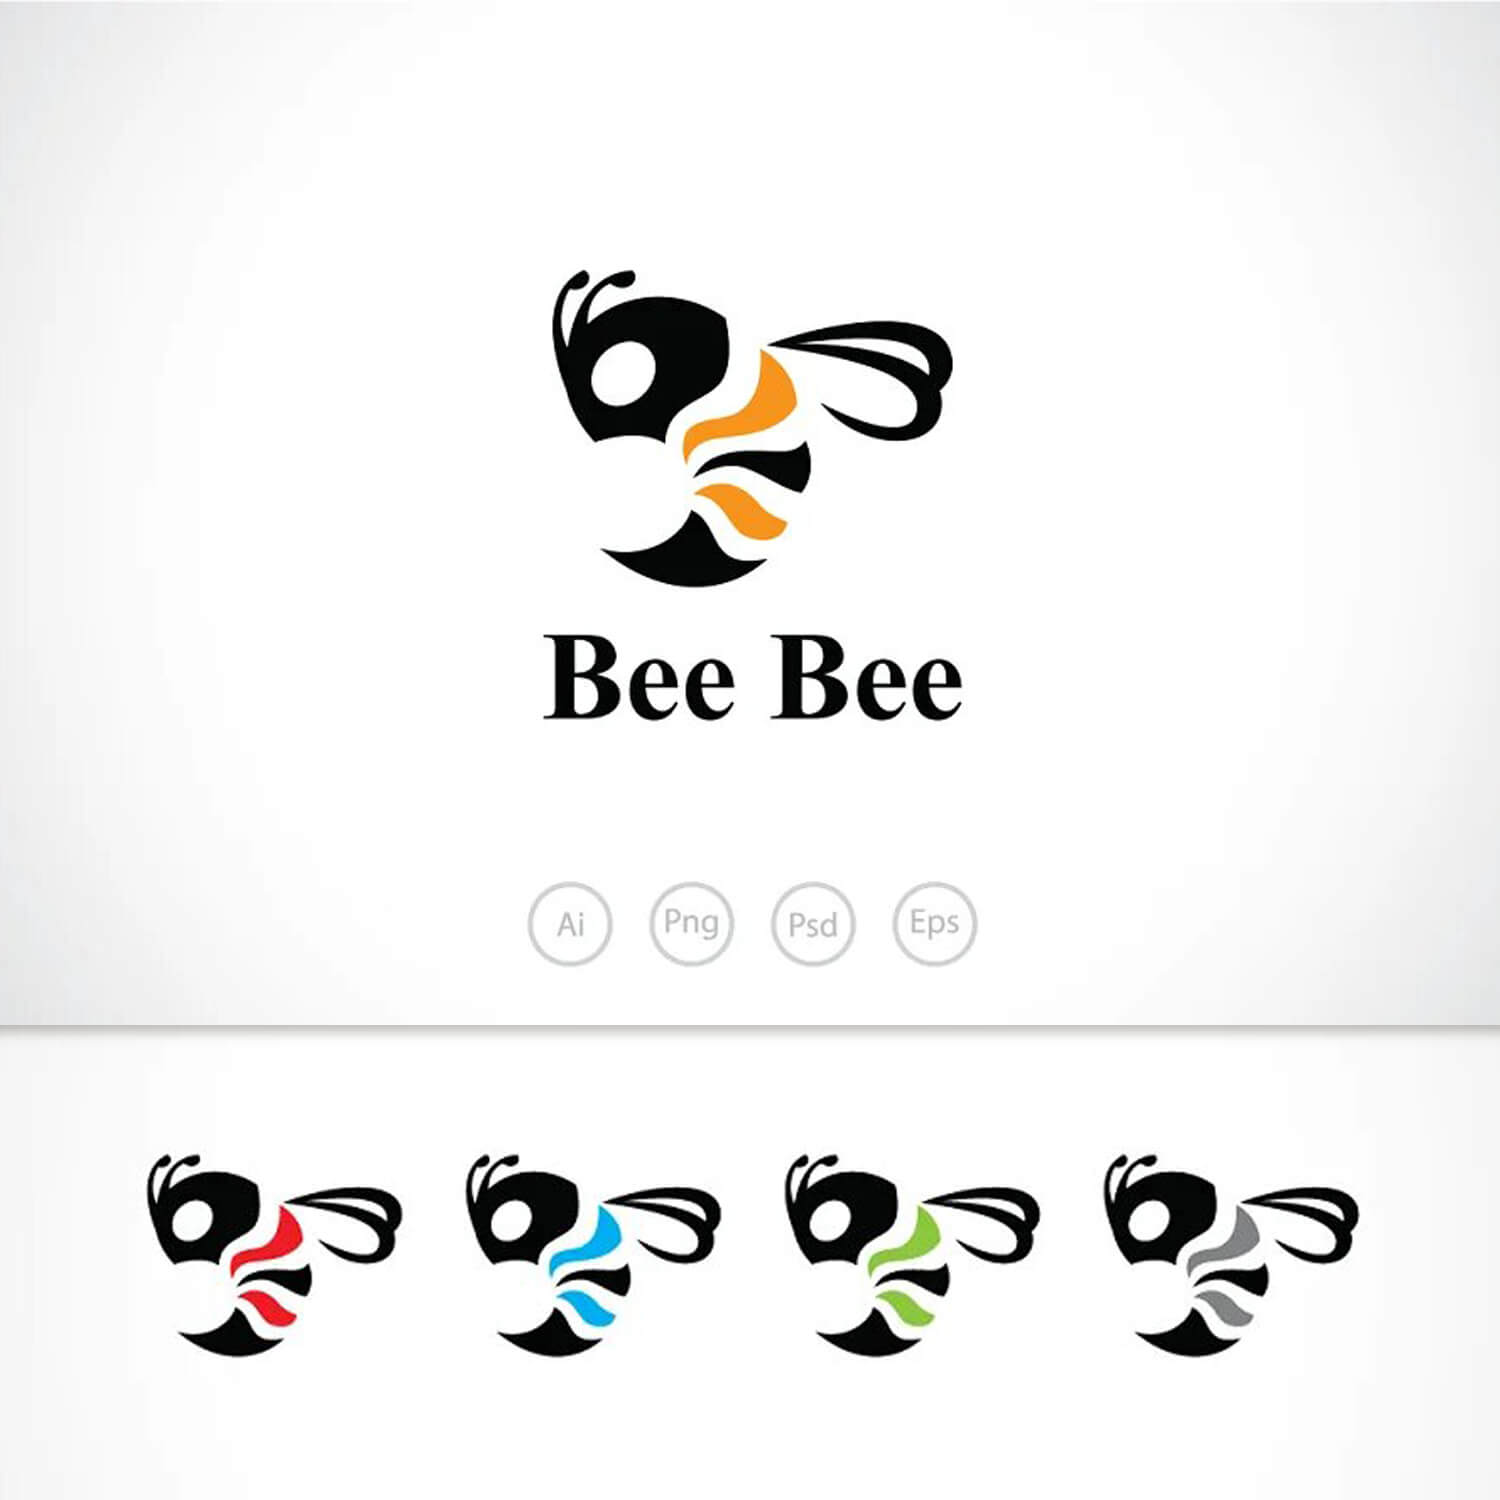 One large bee logo and many small ones.